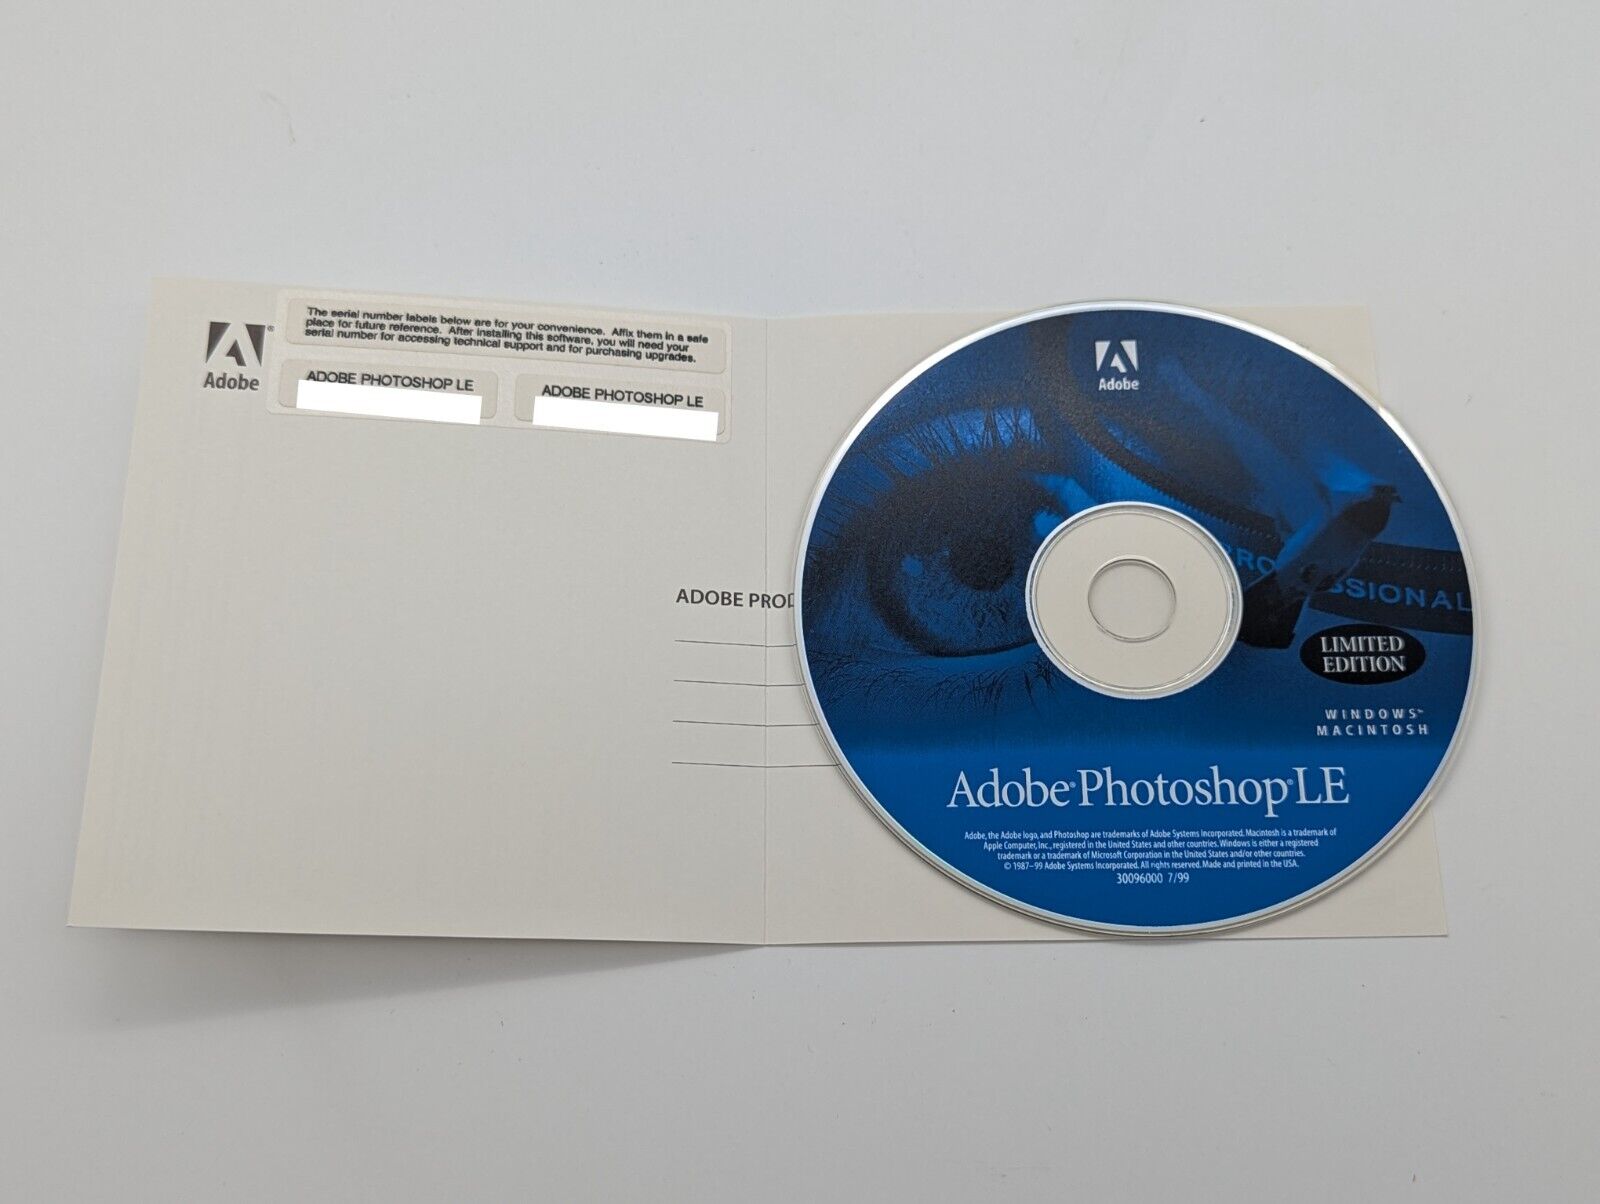 Adobe Photoshop LE with Serial Number Photoshop Limited Edition 5.0 7/99 1999